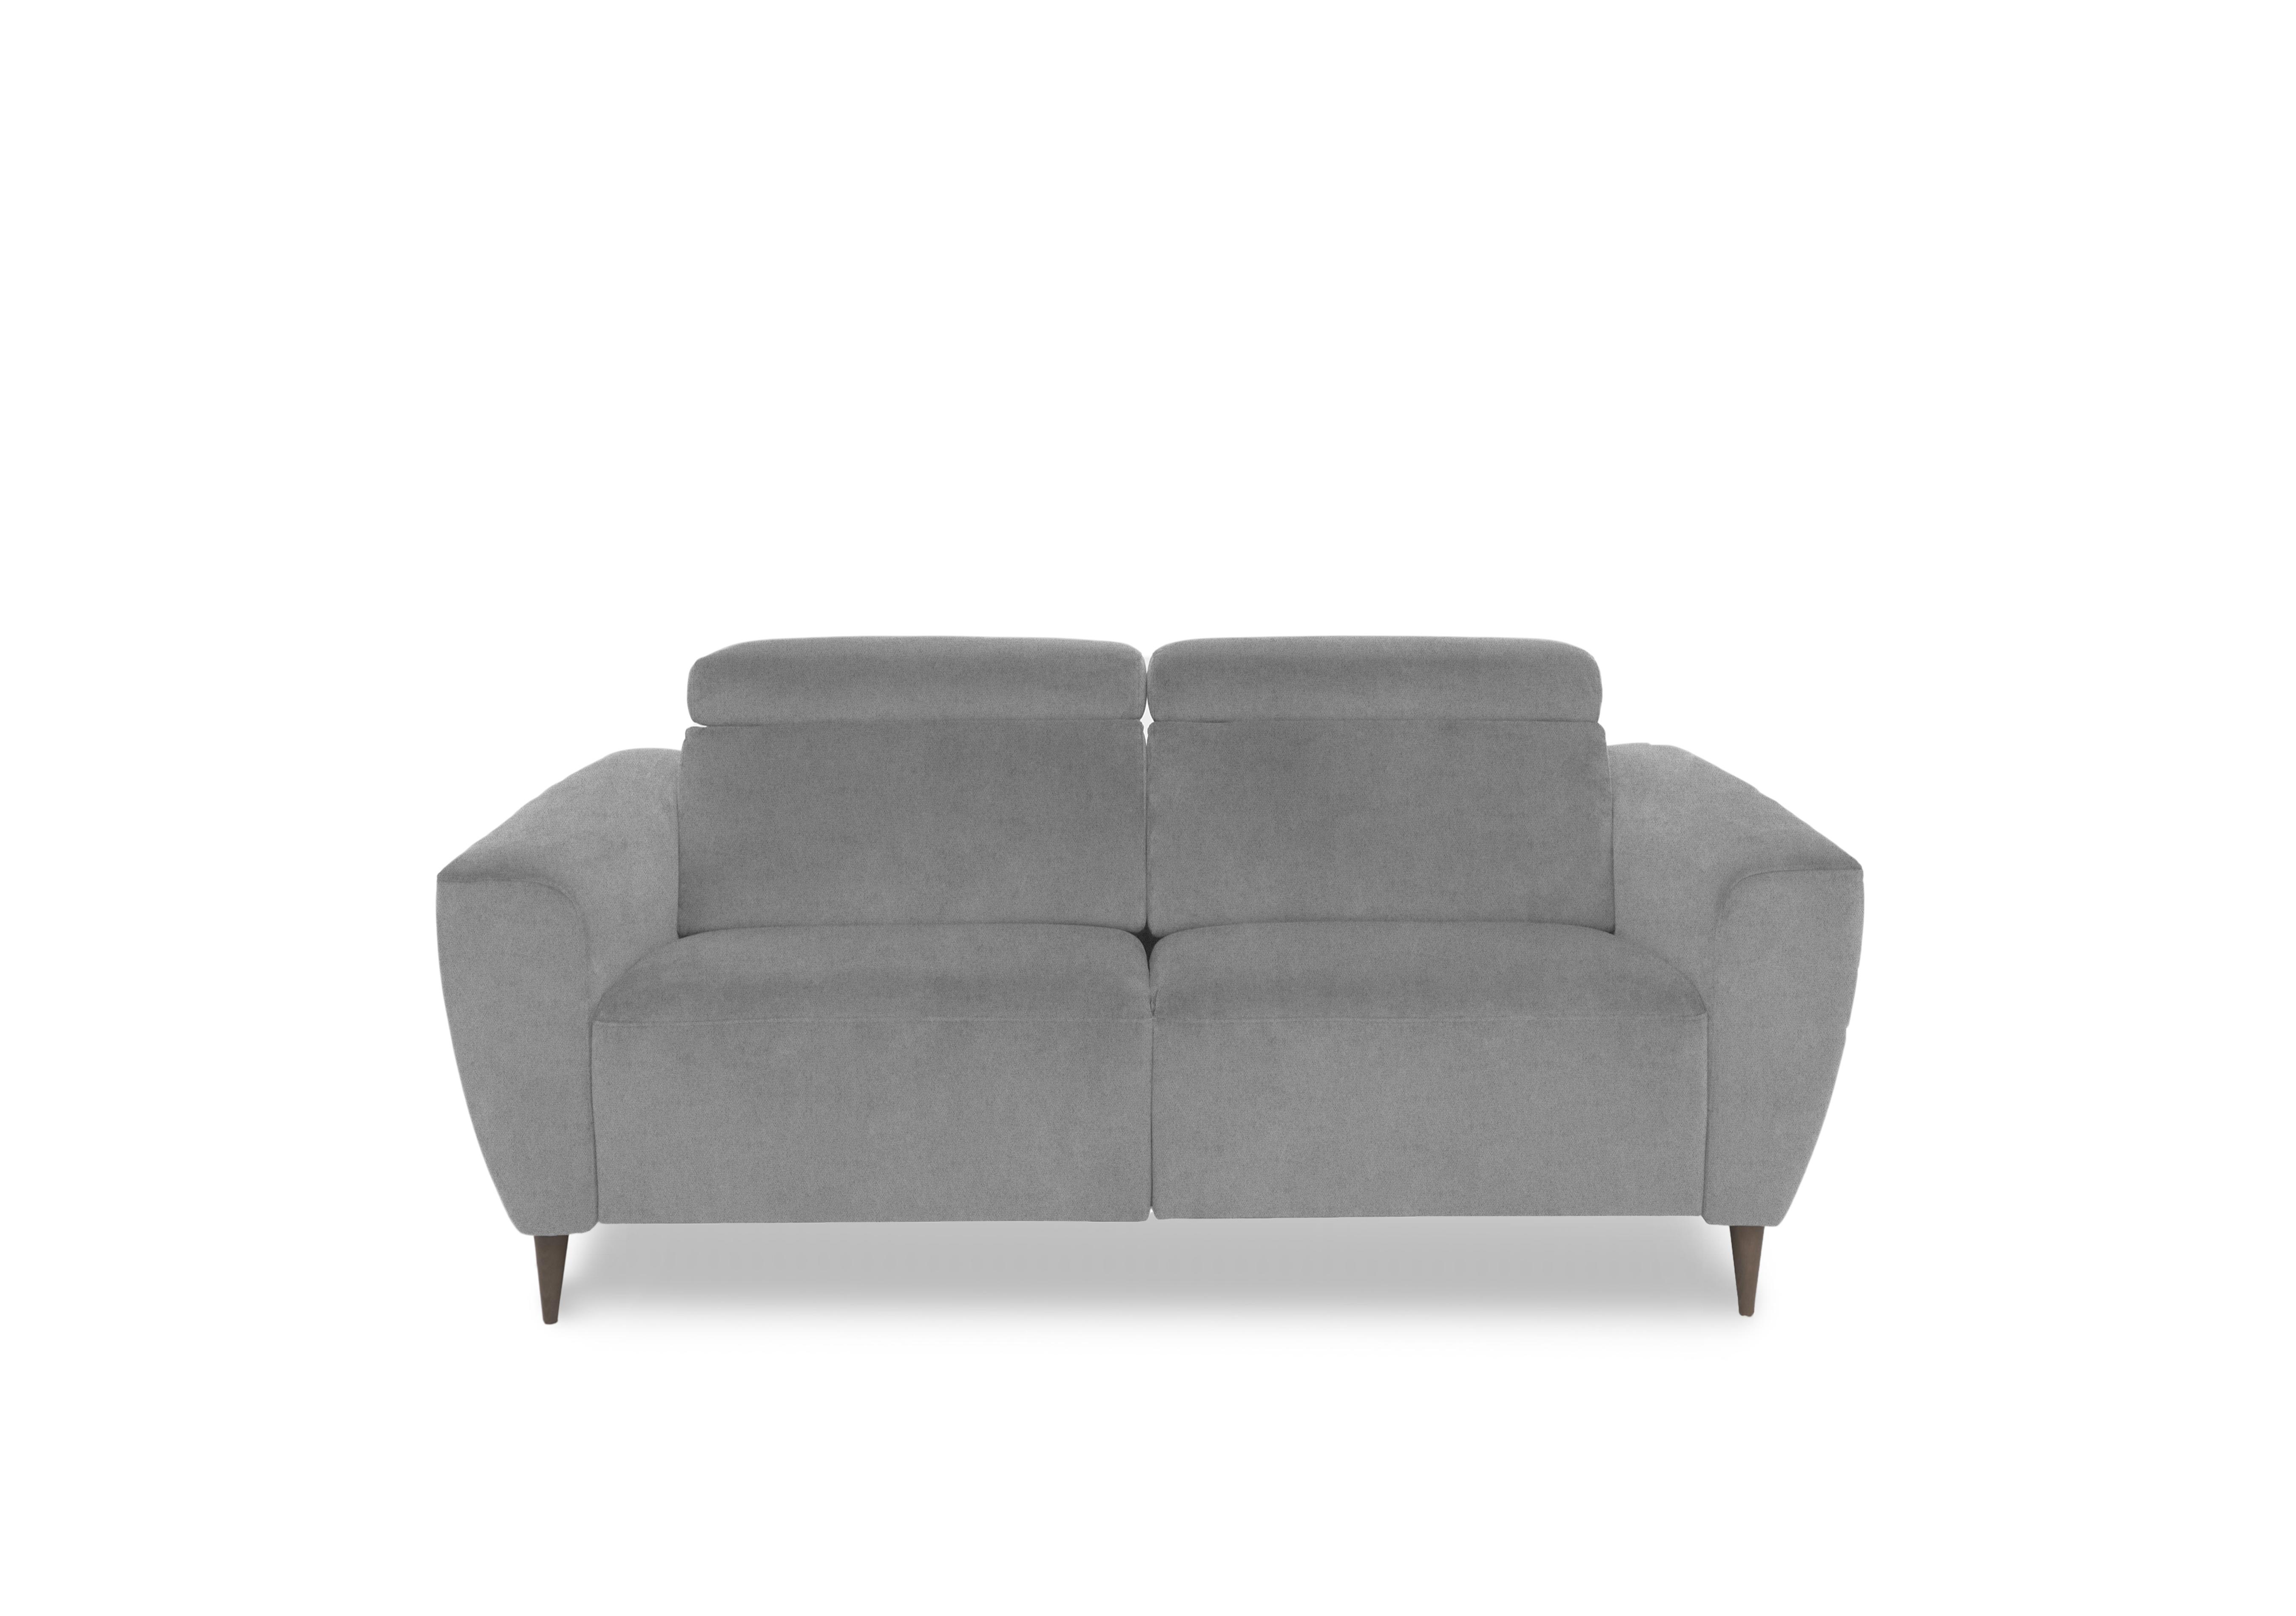 Milano 2 Seater Fabric Sofa in Fuente Ash To Ft on Furniture Village